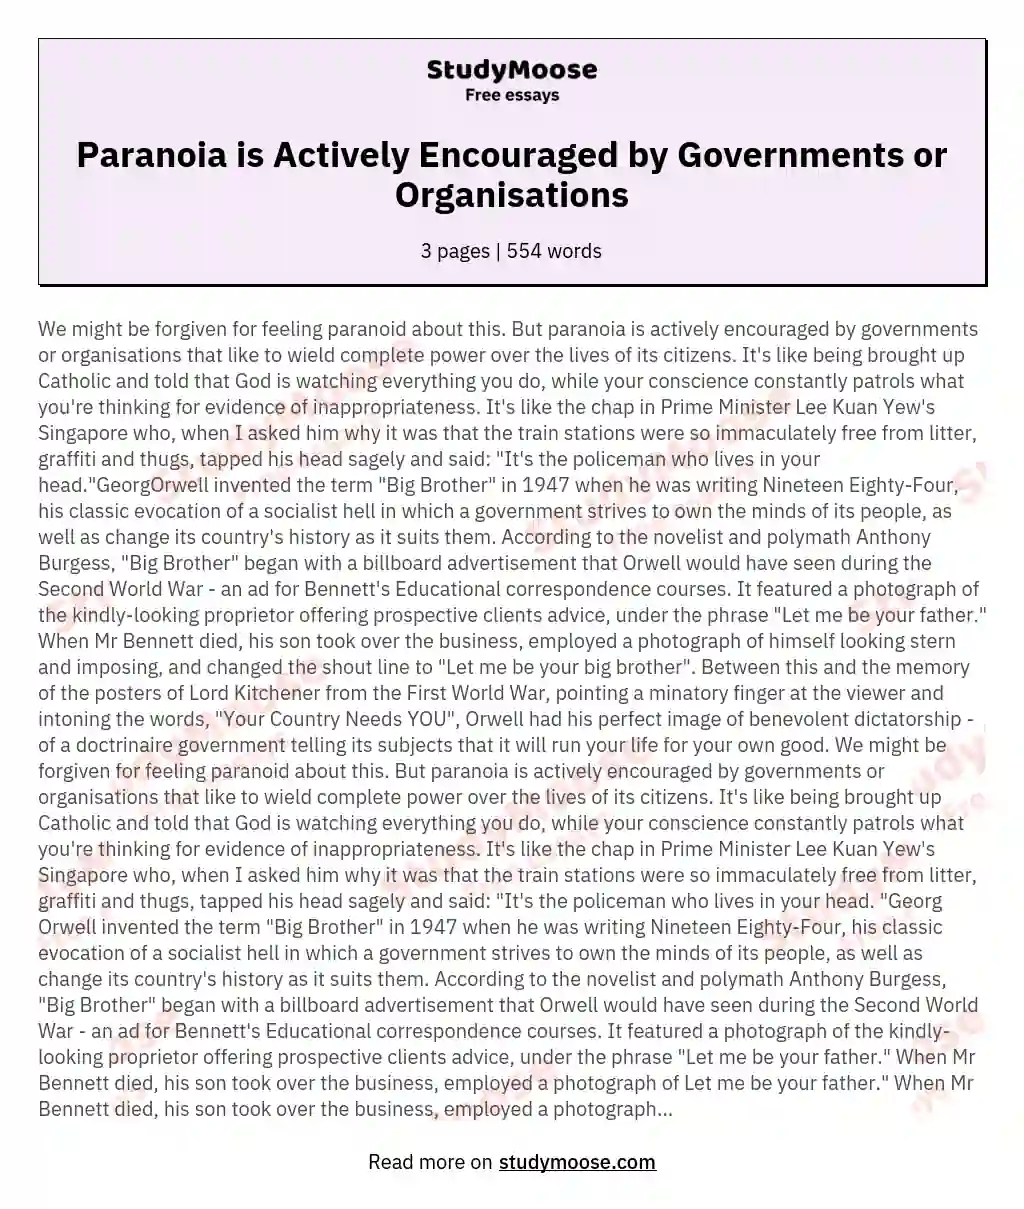 Paranoia is Actively Encouraged by Governments or Organisations